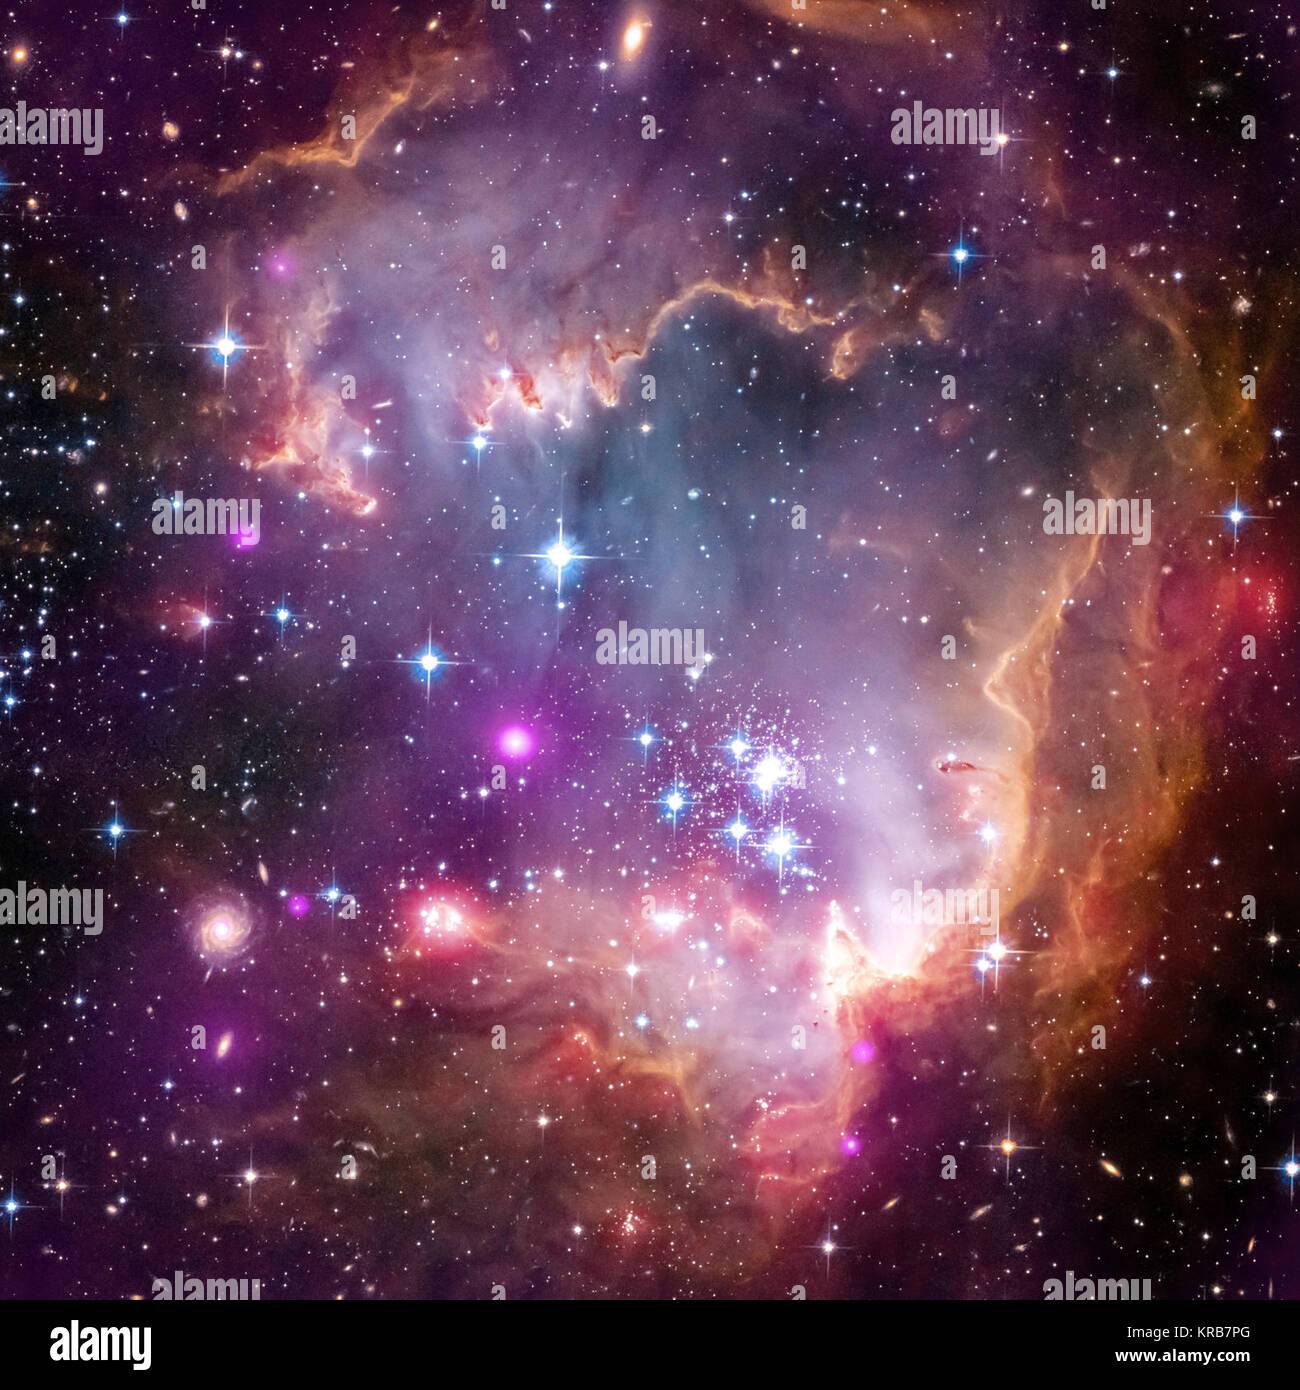 New Chandra observations have been used to make the first detection of X-ray emission from young stars with masses similar to our Sun outside our Milky Way galaxy. The Chandra observations of these low-mass stars were made of the region known as the "Wing" of the Small Magellanic Cloud (SMC), one of the Milky Way's closest galactic neighbors. In this composite image of the Wing the Chandra data is shown in purple, optical data from the Hubble Space Telescope is shown in red, green and blue and infrared data from the Spitzer Space Telescope is shown in red. Astronomers call all elements heavier Stock Photo